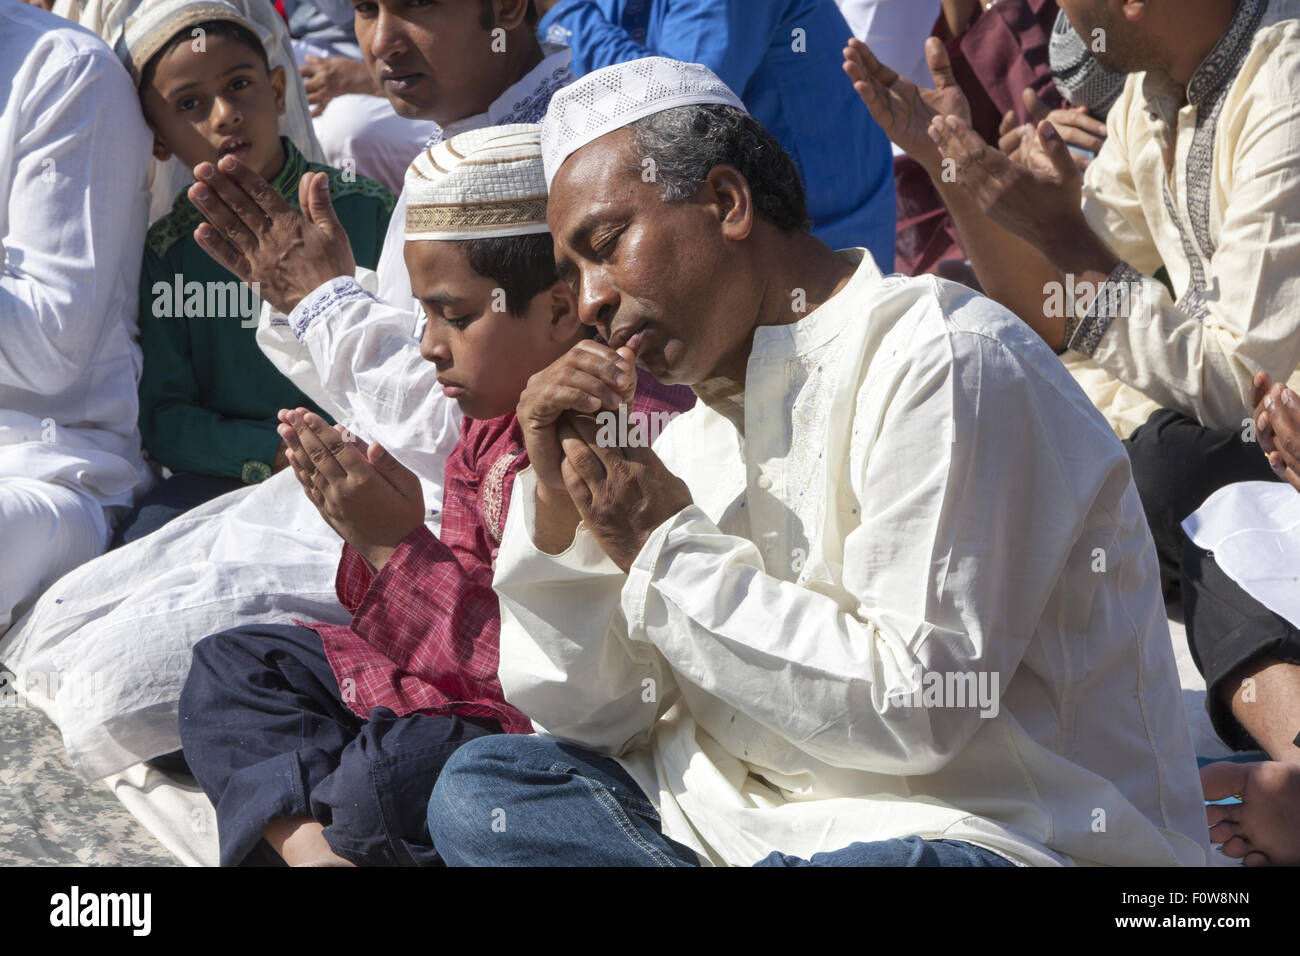 Muslims pray outside a mosque in Kensington, Brooklyn, NY for 'Eid al-Fitr.' The holiday, celebrated around the world, marks the Stock Photo